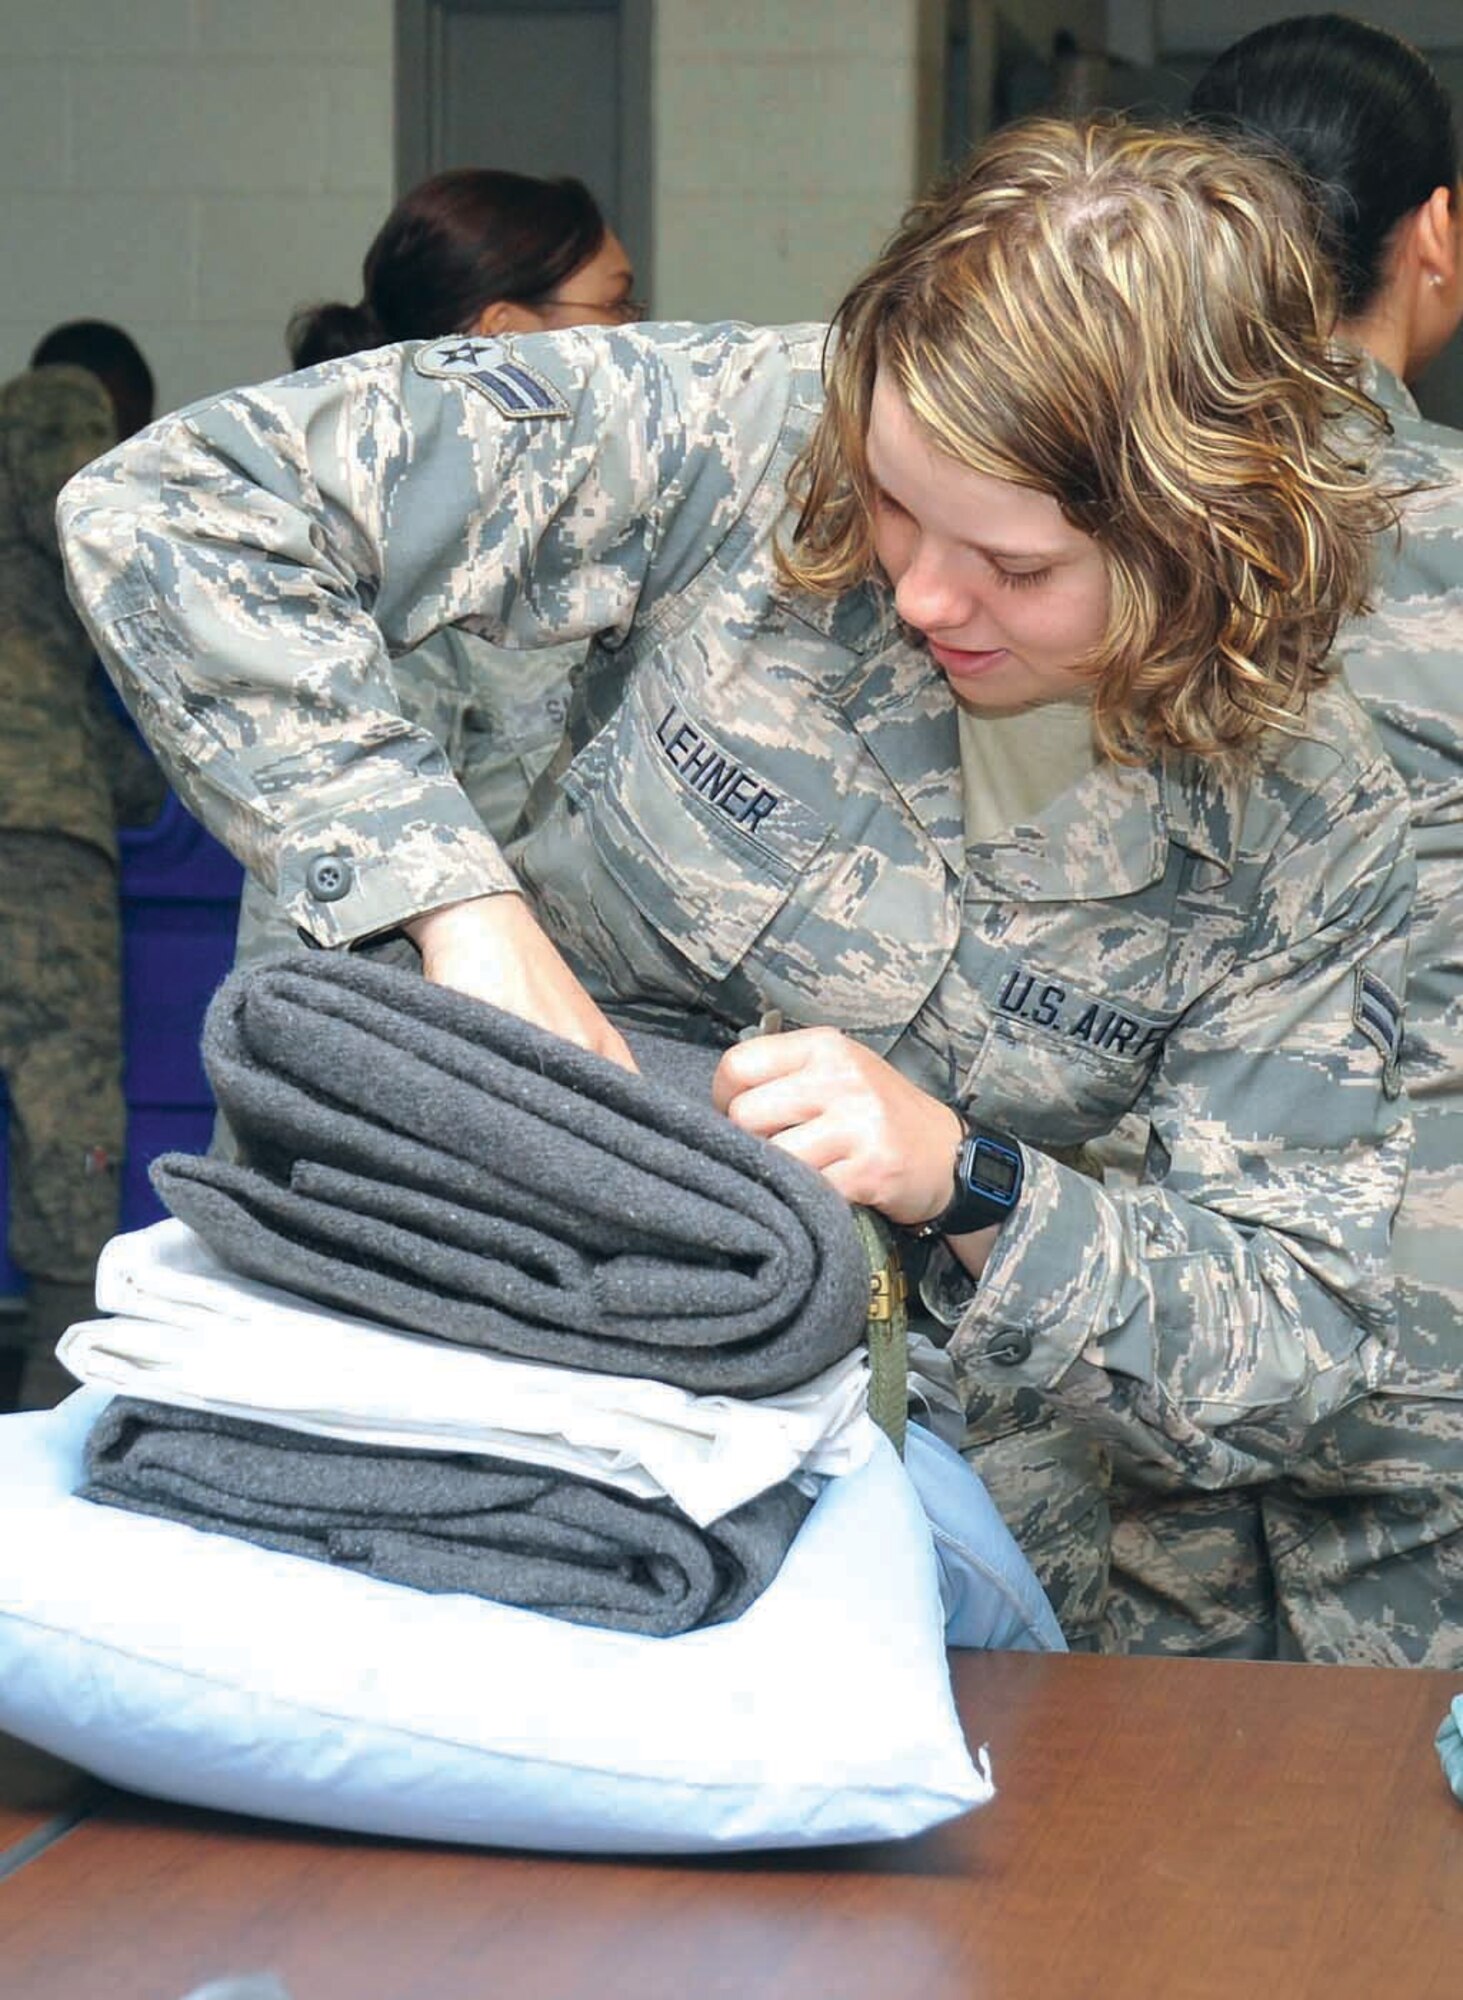 Airman 1st Class Taryn Lehner bundles ‘Newbie Bundles’ consisting of blankets and linens for Trainees and Airmen arriving to the 324th Training Squadron. (U.S. Air Force Photo/Alan Boedeker)